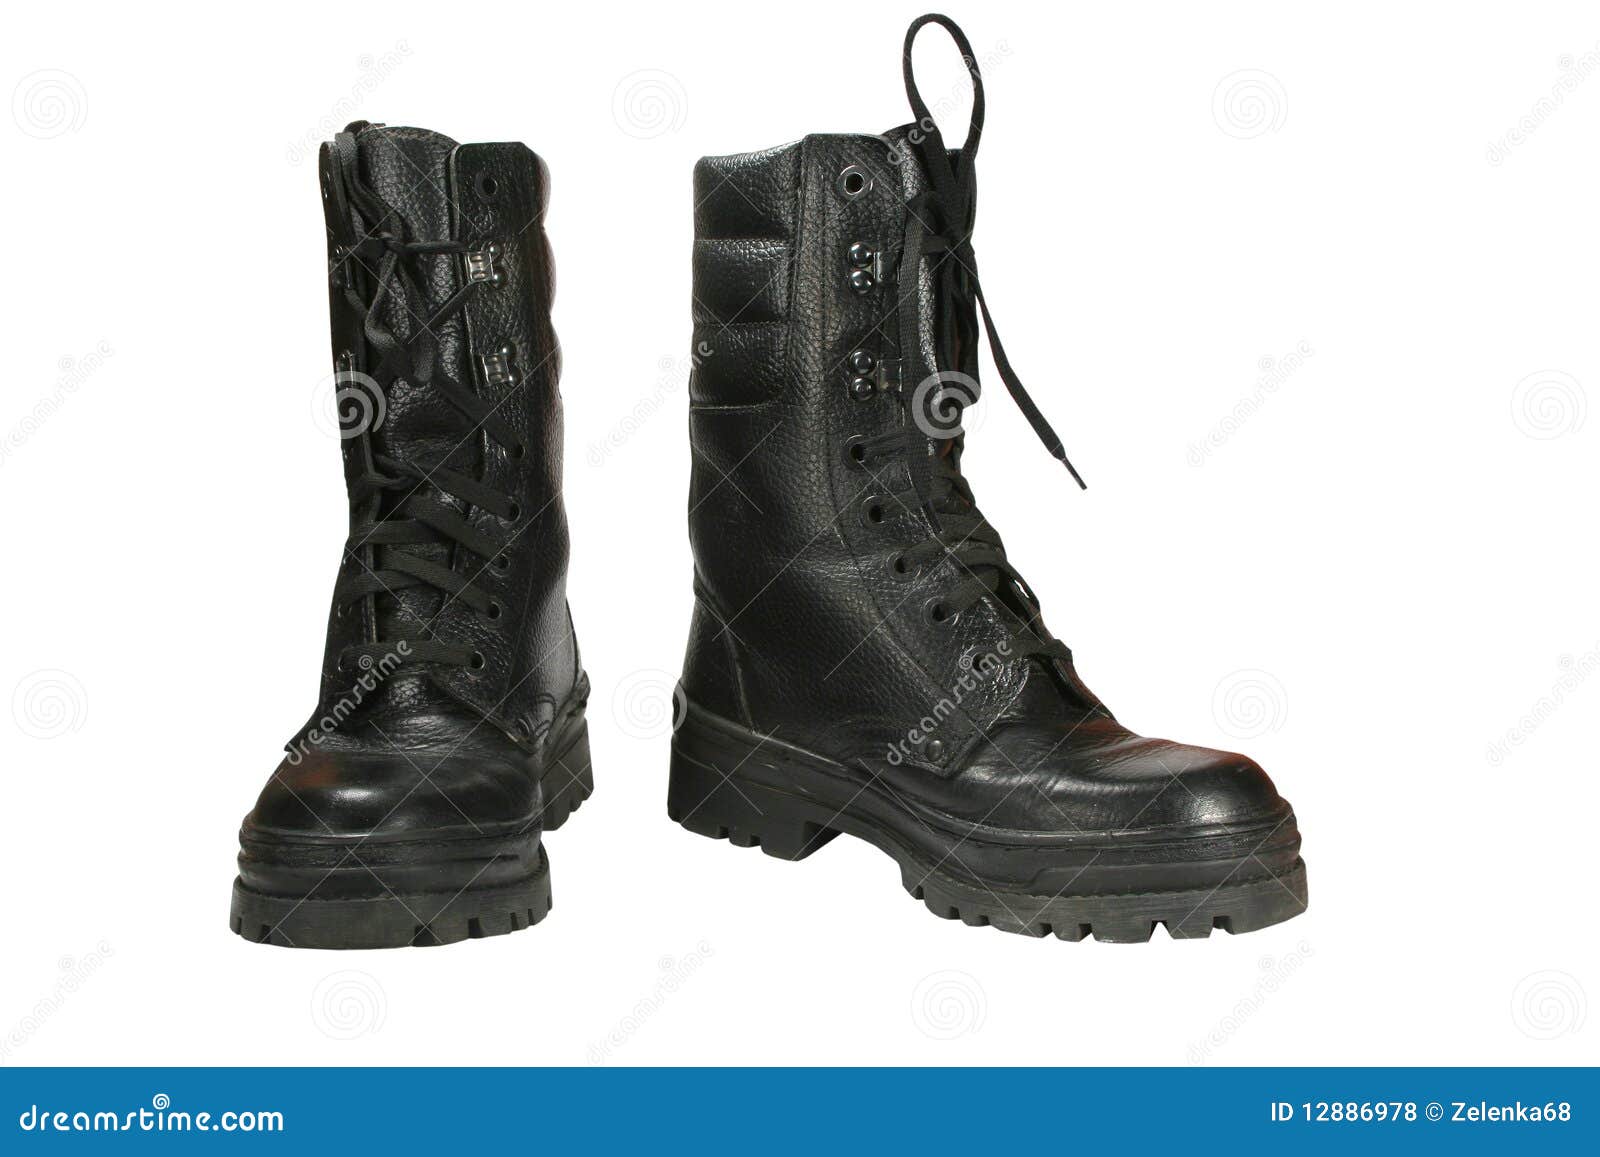 Army boots stock photo. Image of boot, laces, sole, skin - 12886978